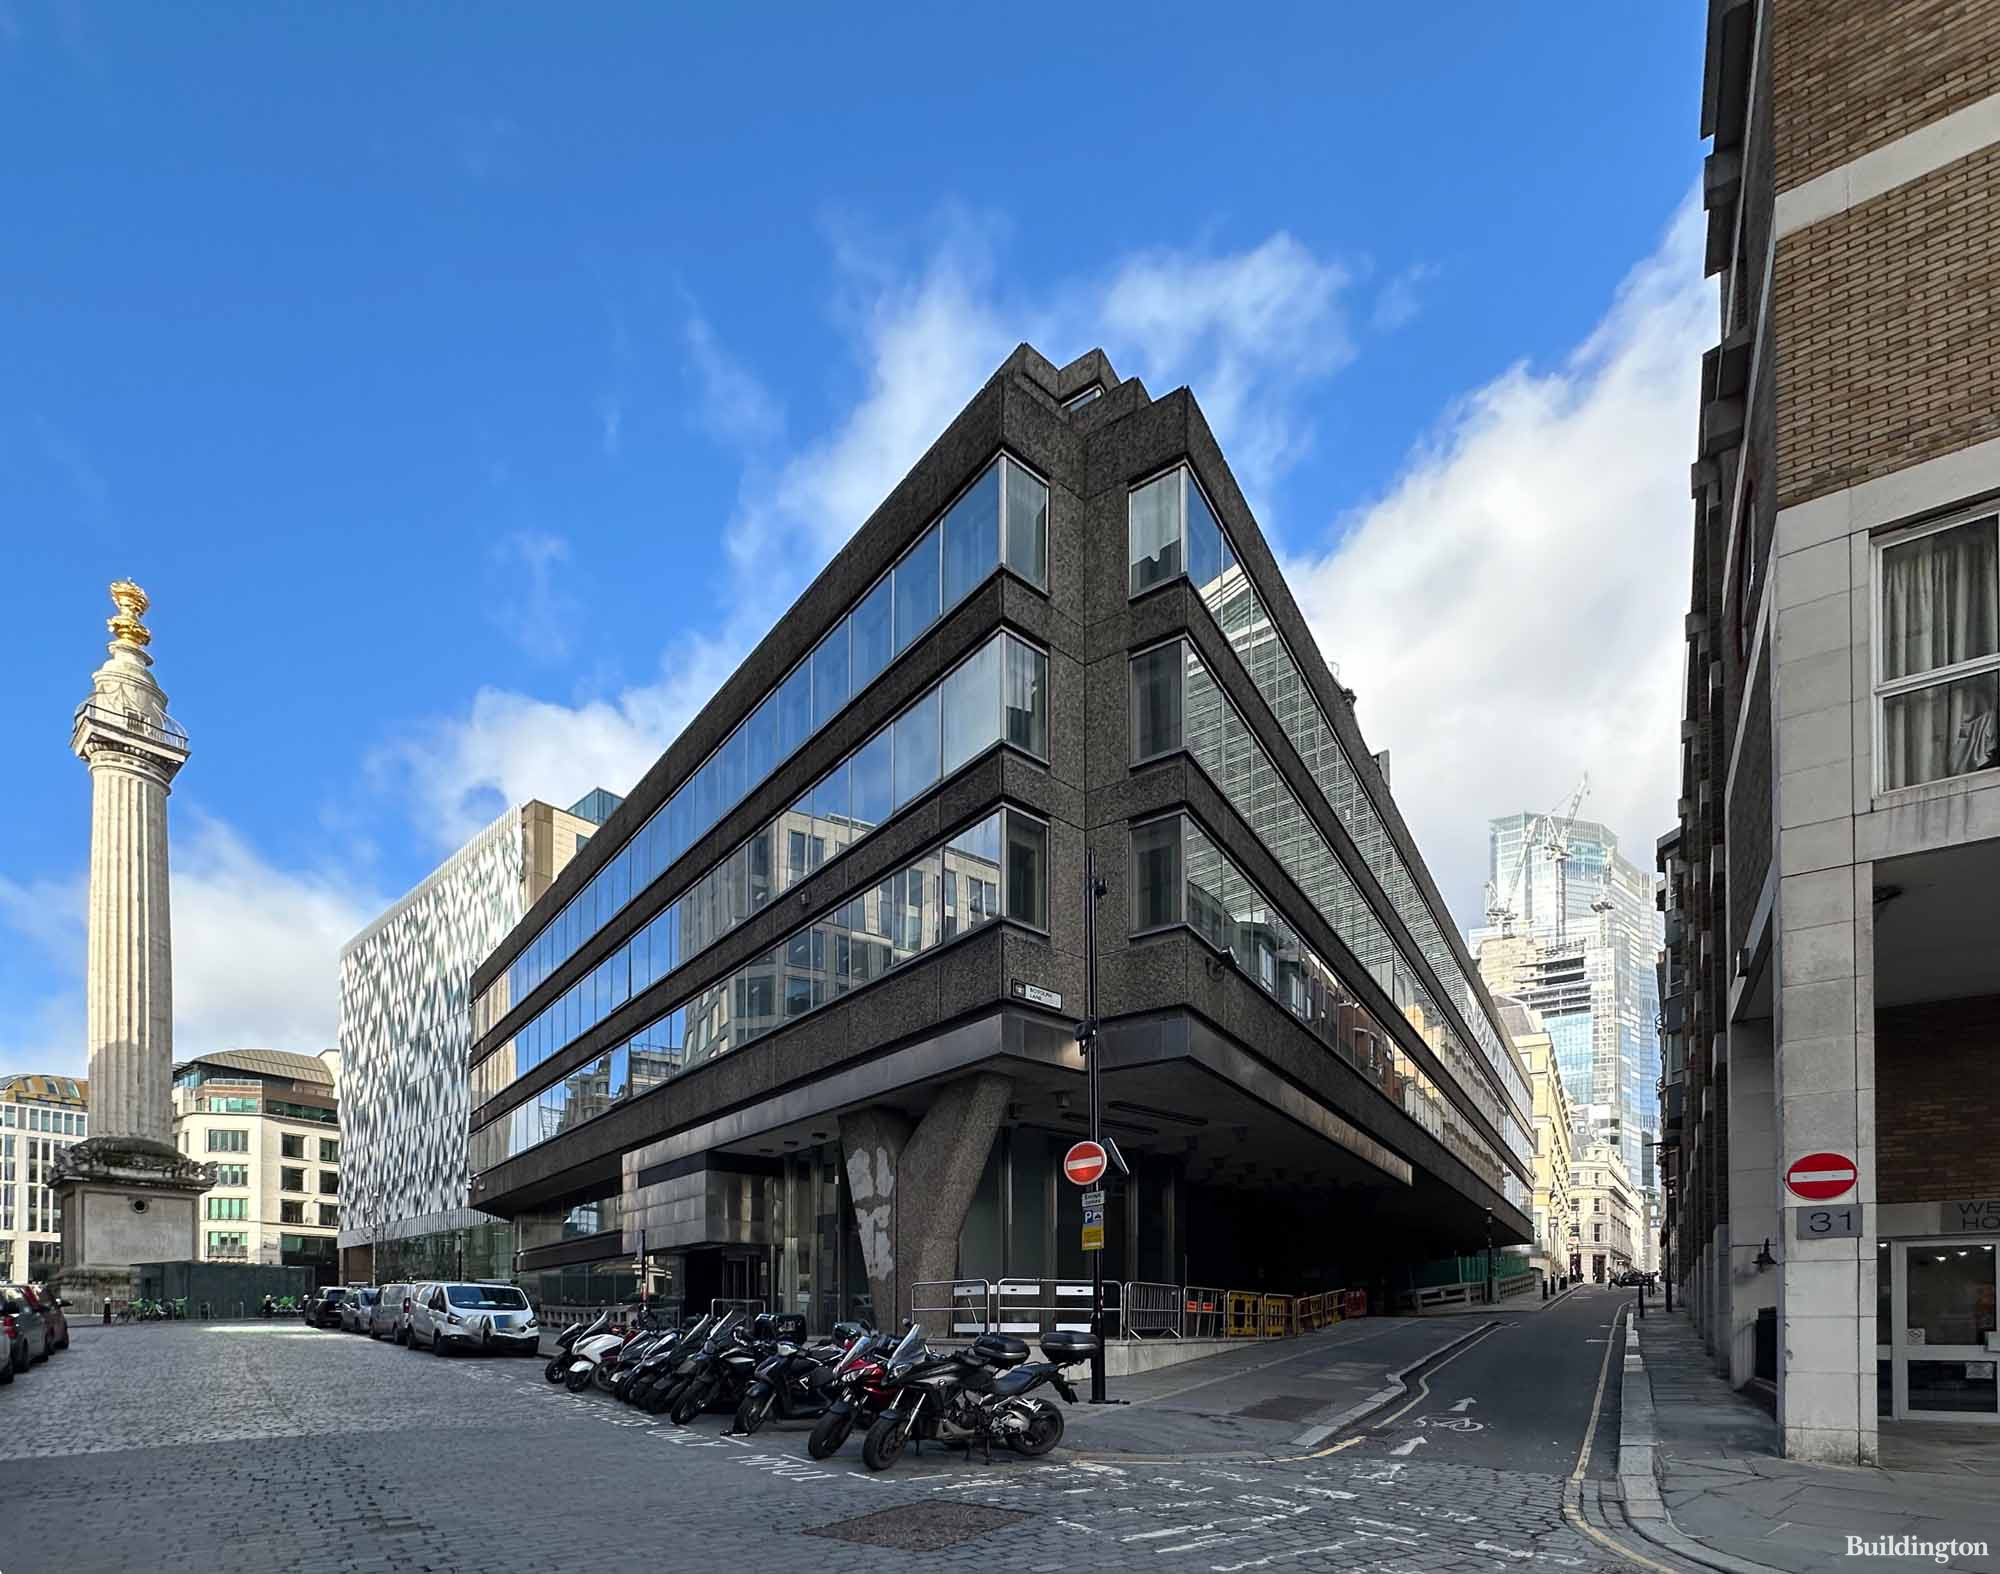 Faryners House office building on Monument Street in the City of London EC3.